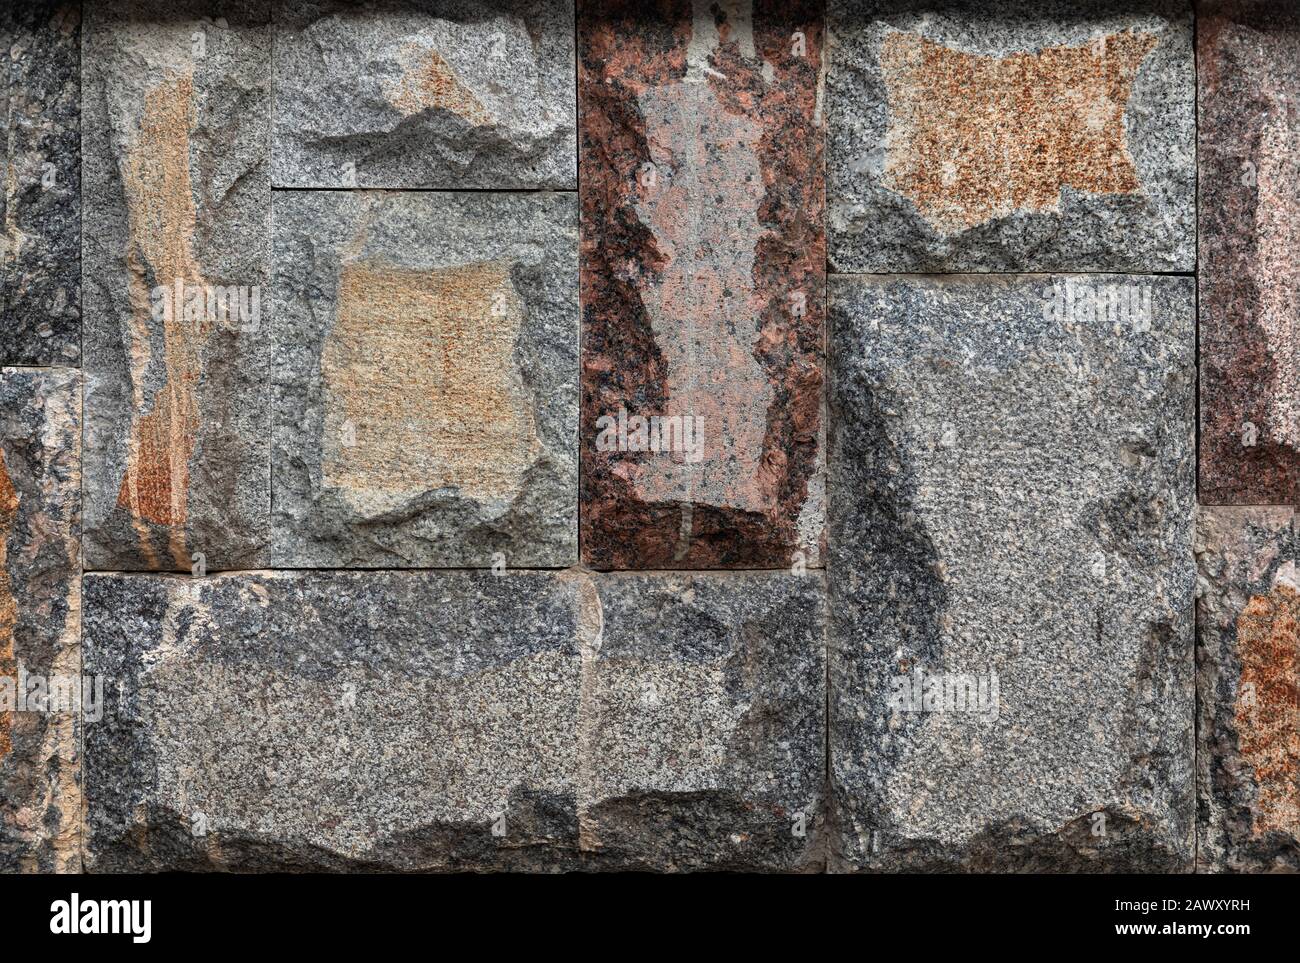 Close-up rectangular granite blocks of different colors and sizes Stock Photo